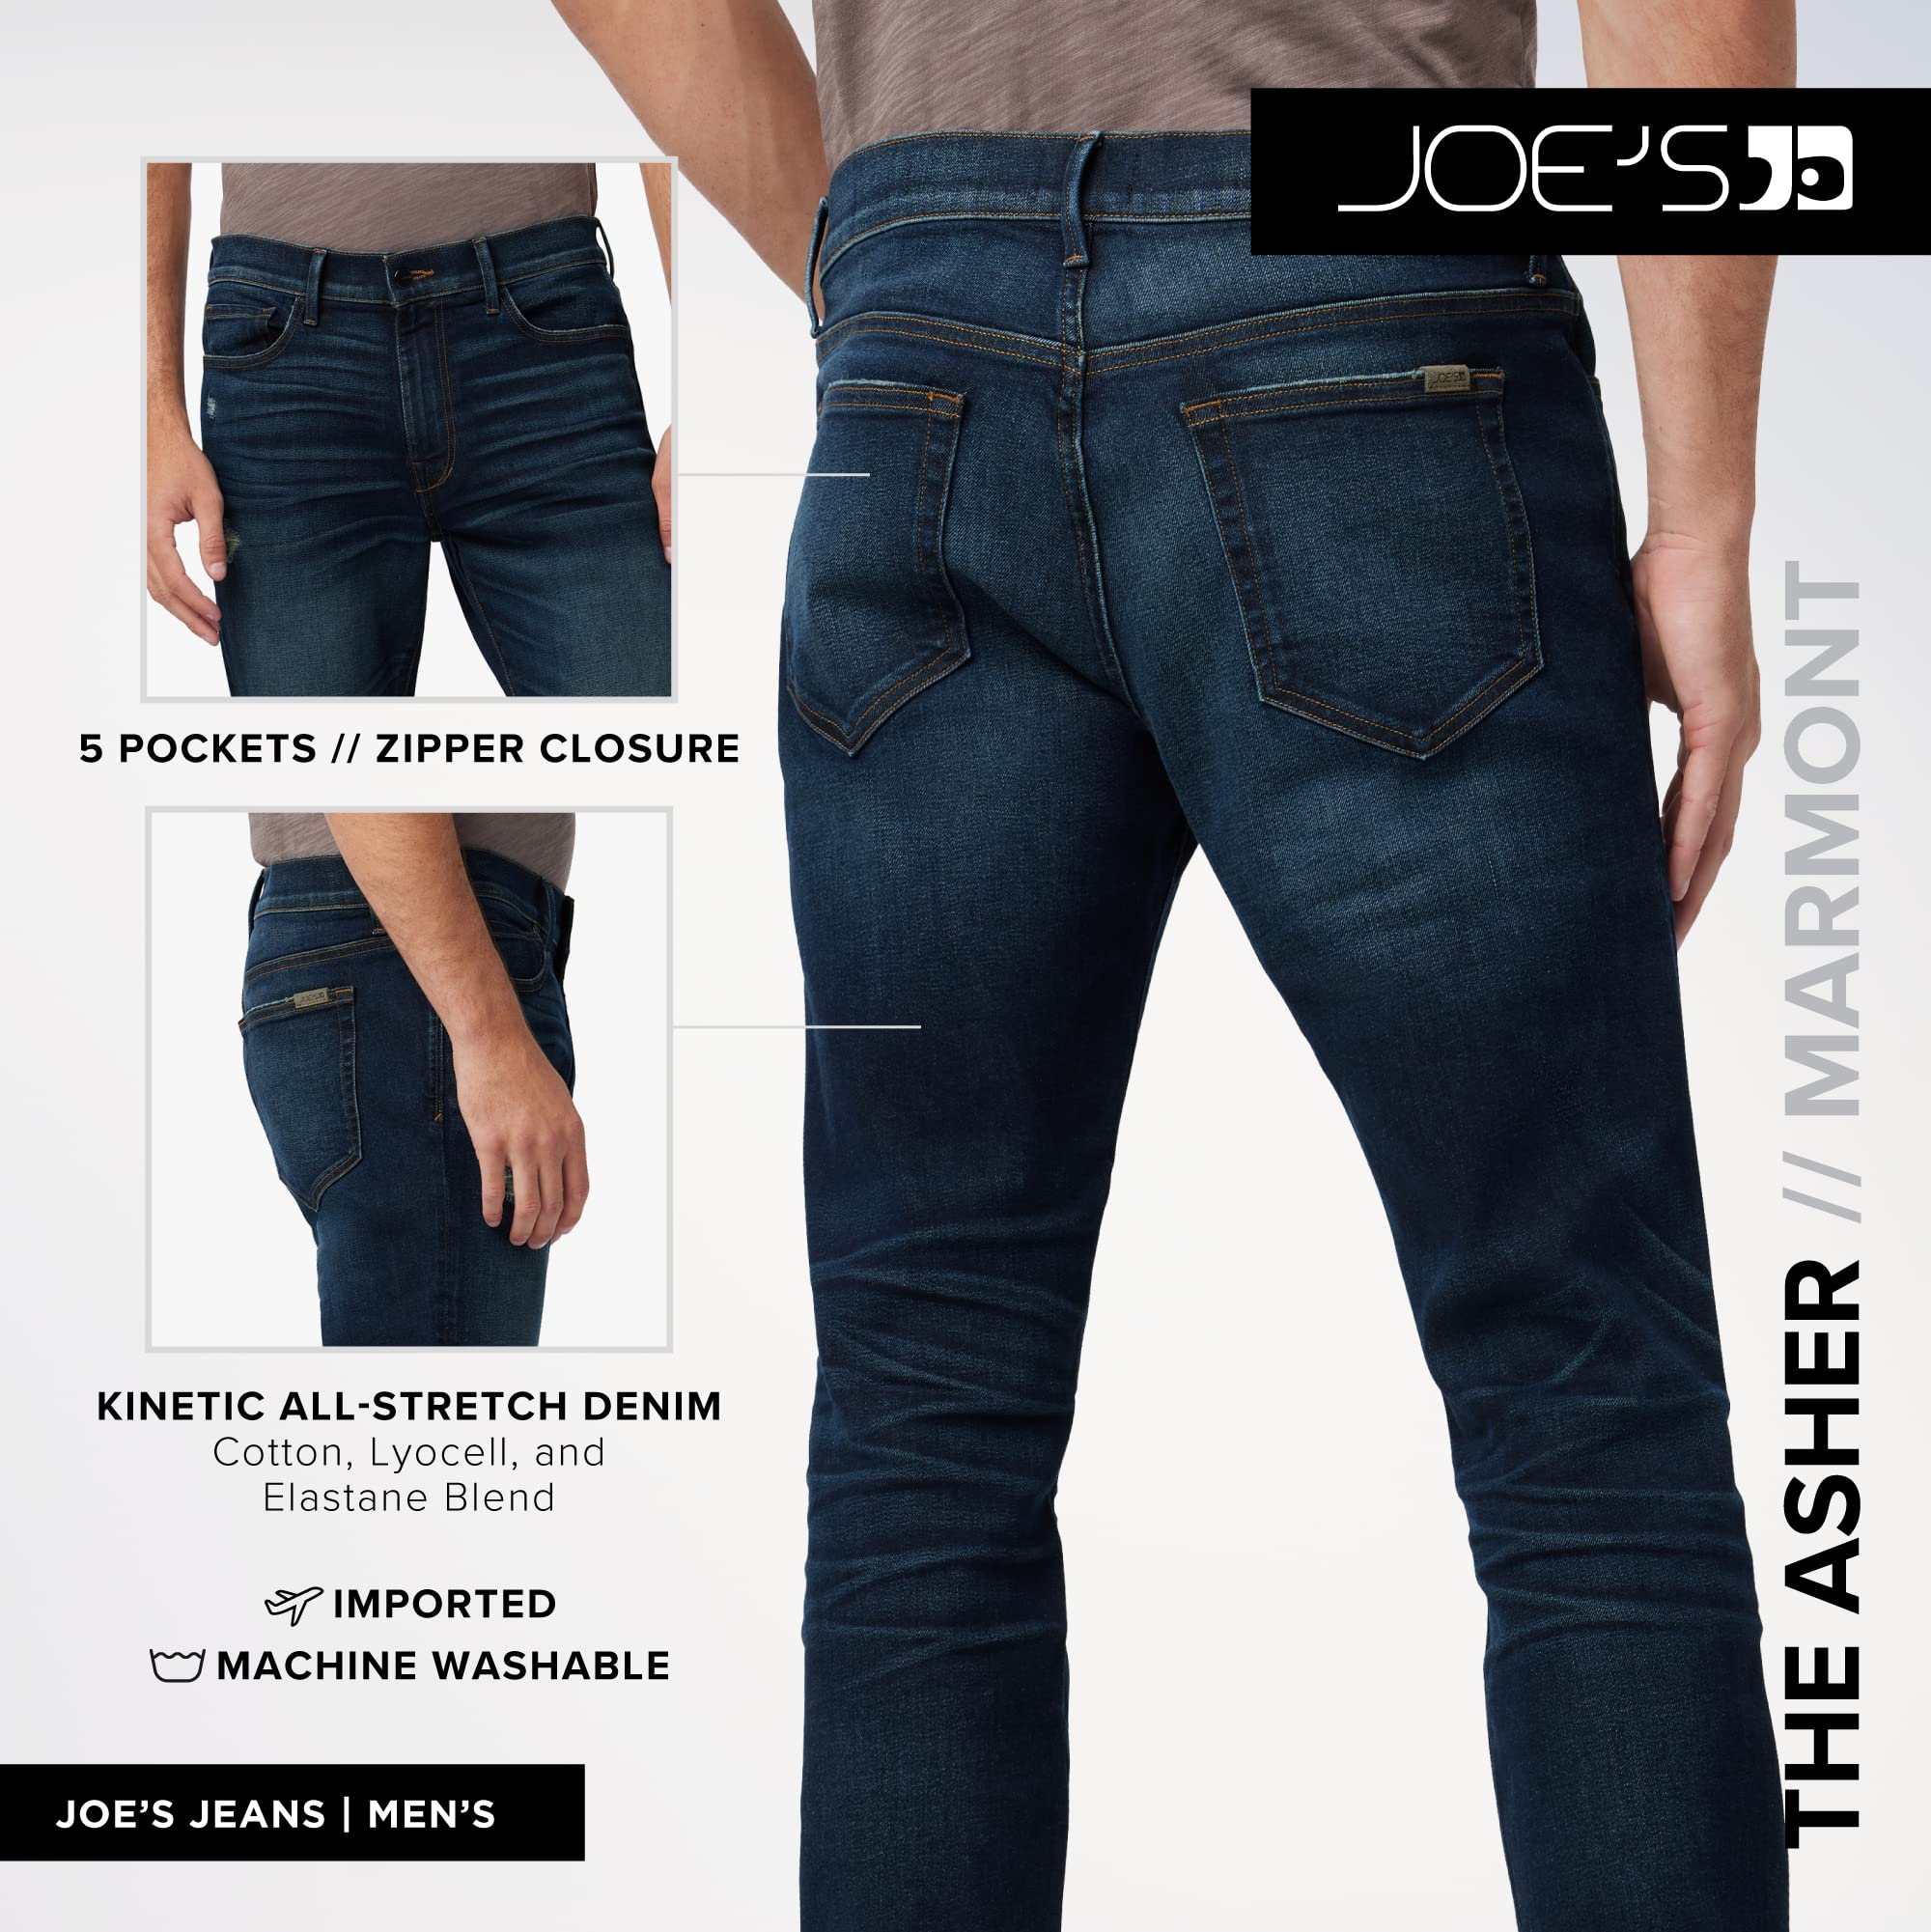 Joe's Jeans Men's The Asher Kinetic French Terry